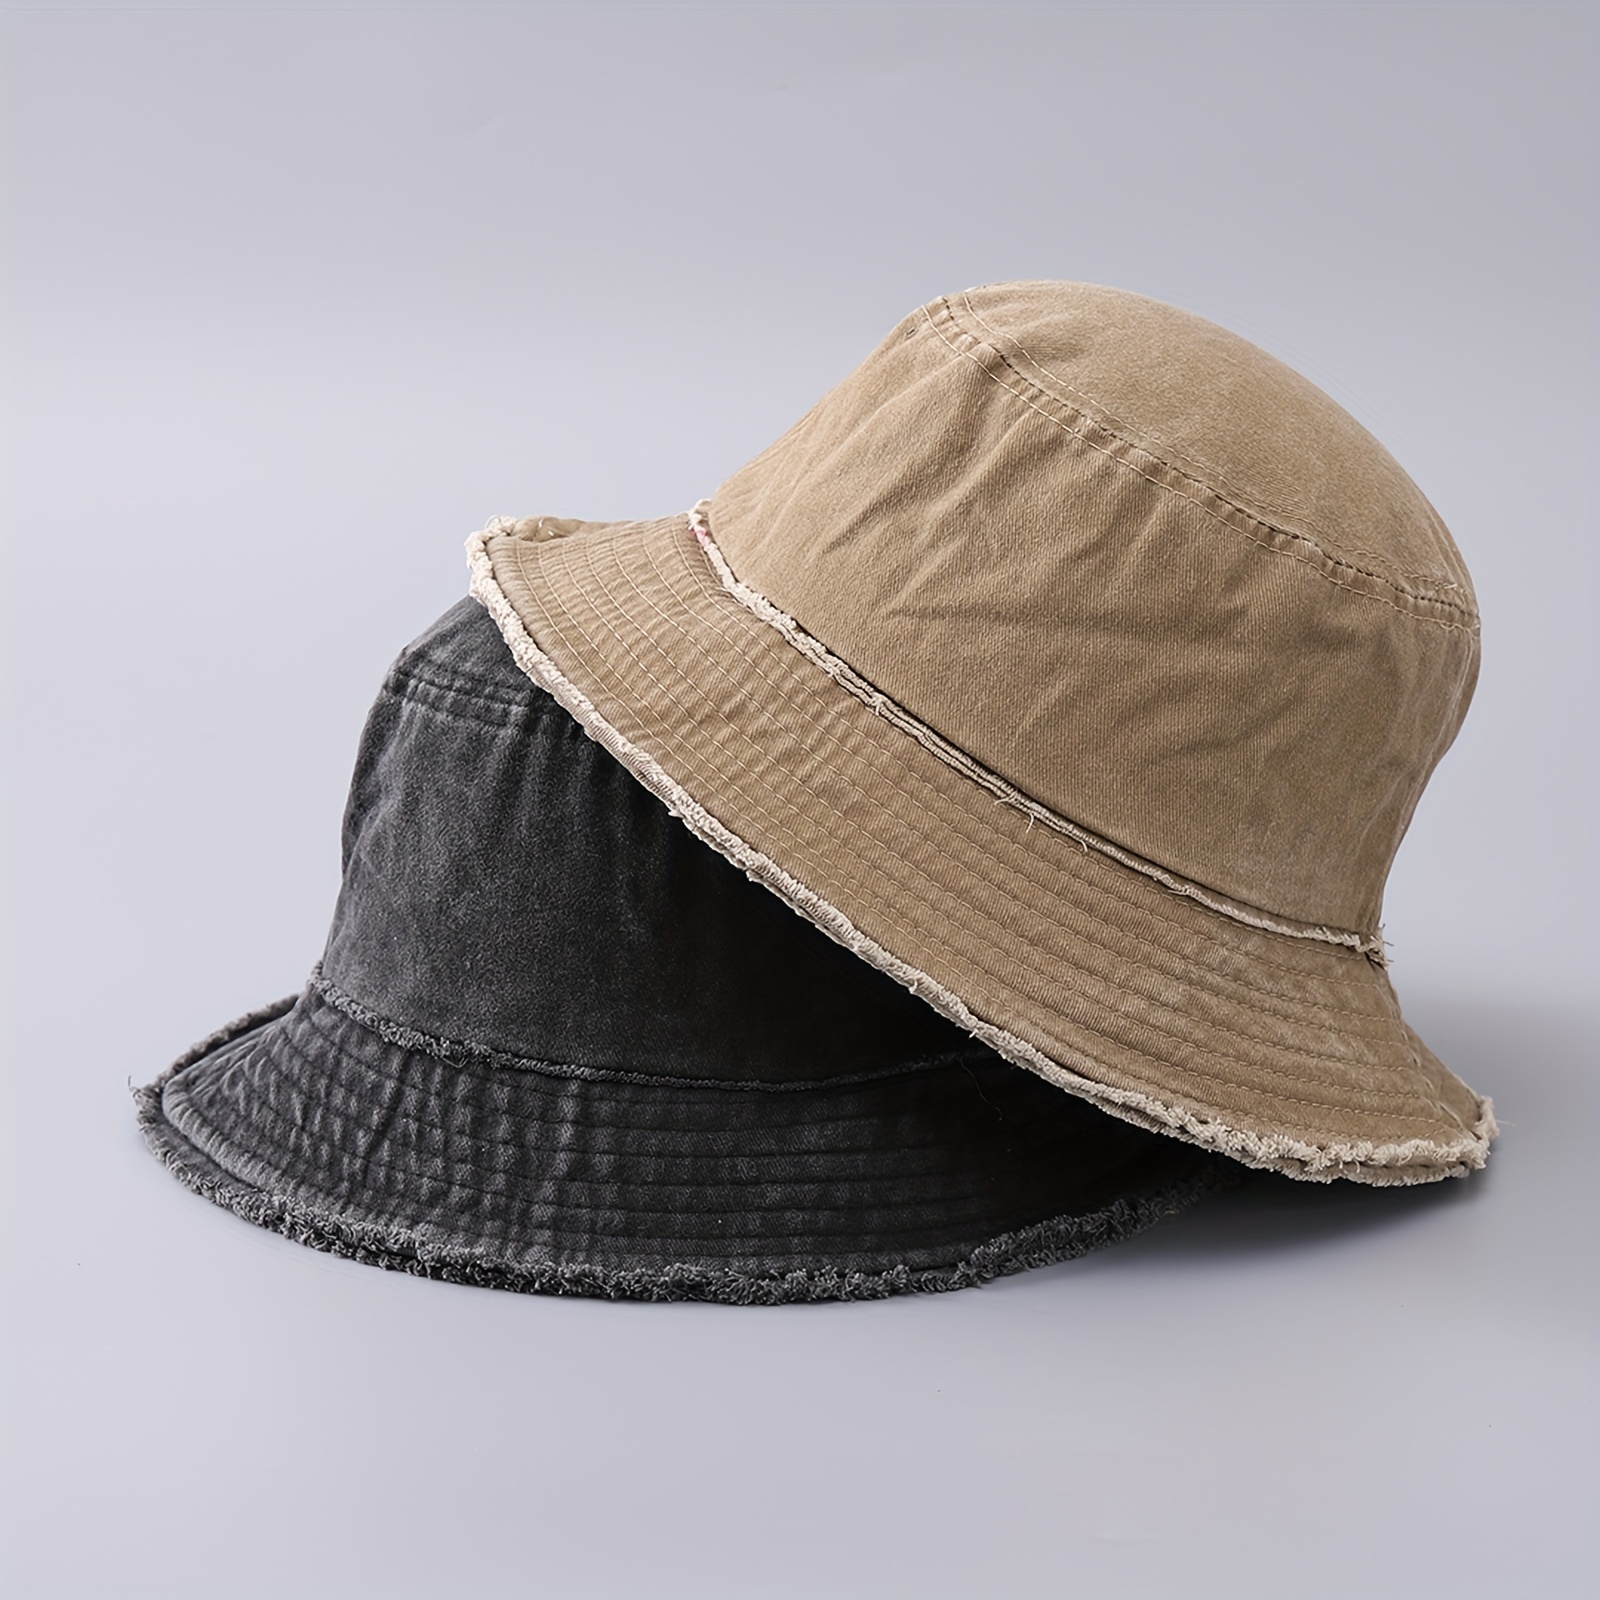 New Solid Bucket Hats With Rope 2021 Spring Summer Beach Panama